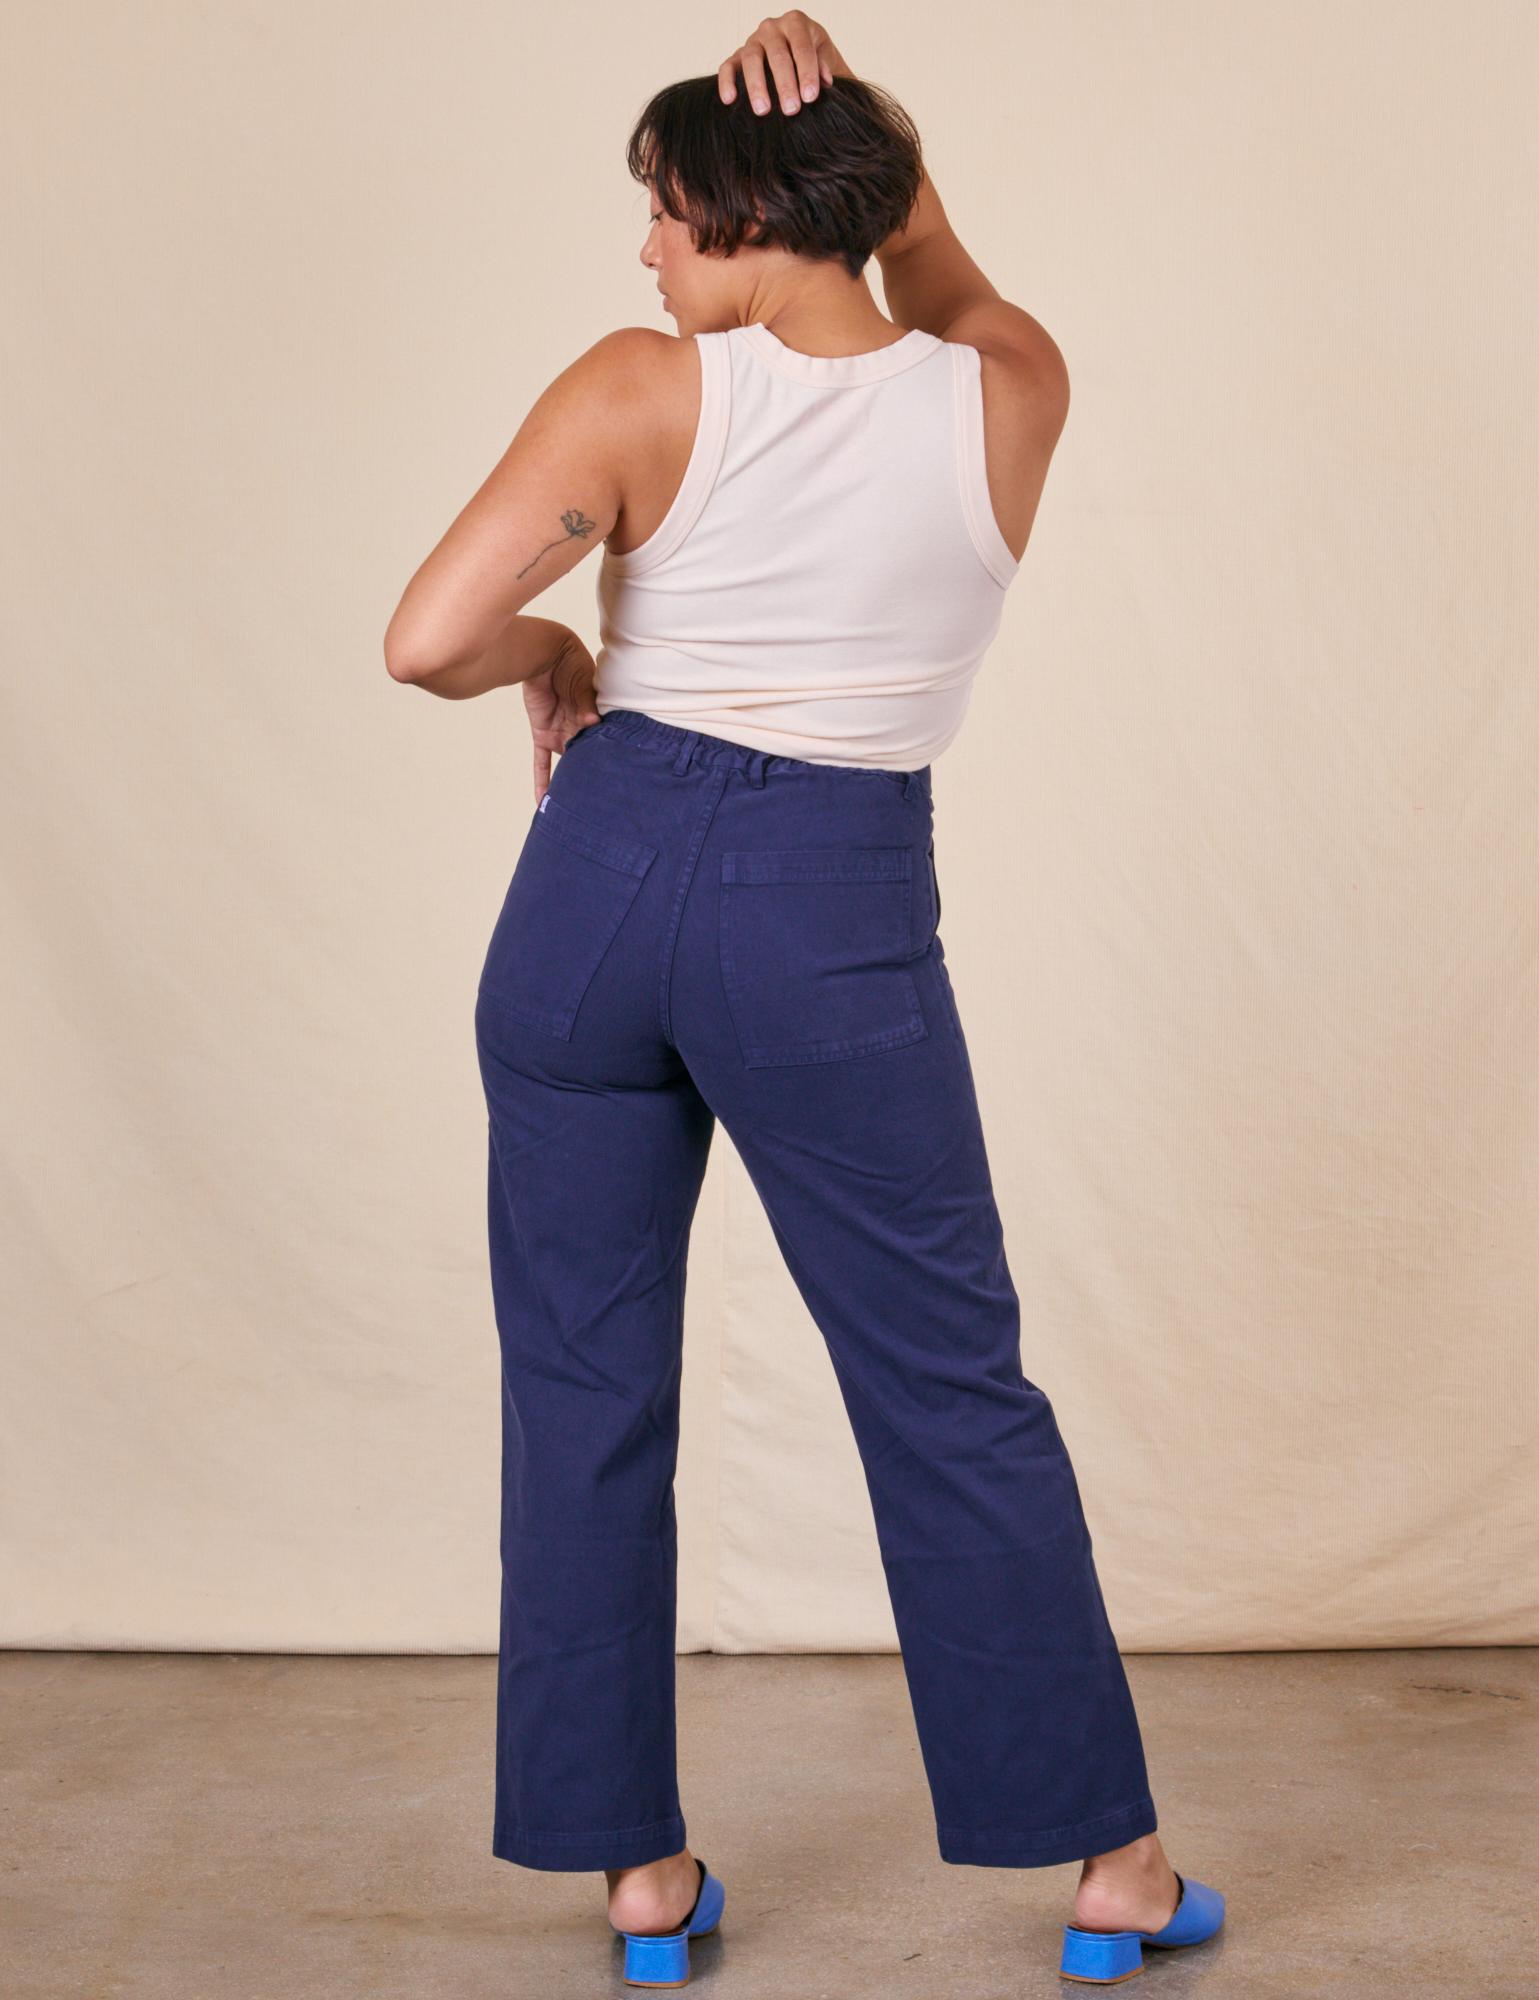 Back view of Work Pants in Navy Blue and vintage off-white Tank Top on Tiara